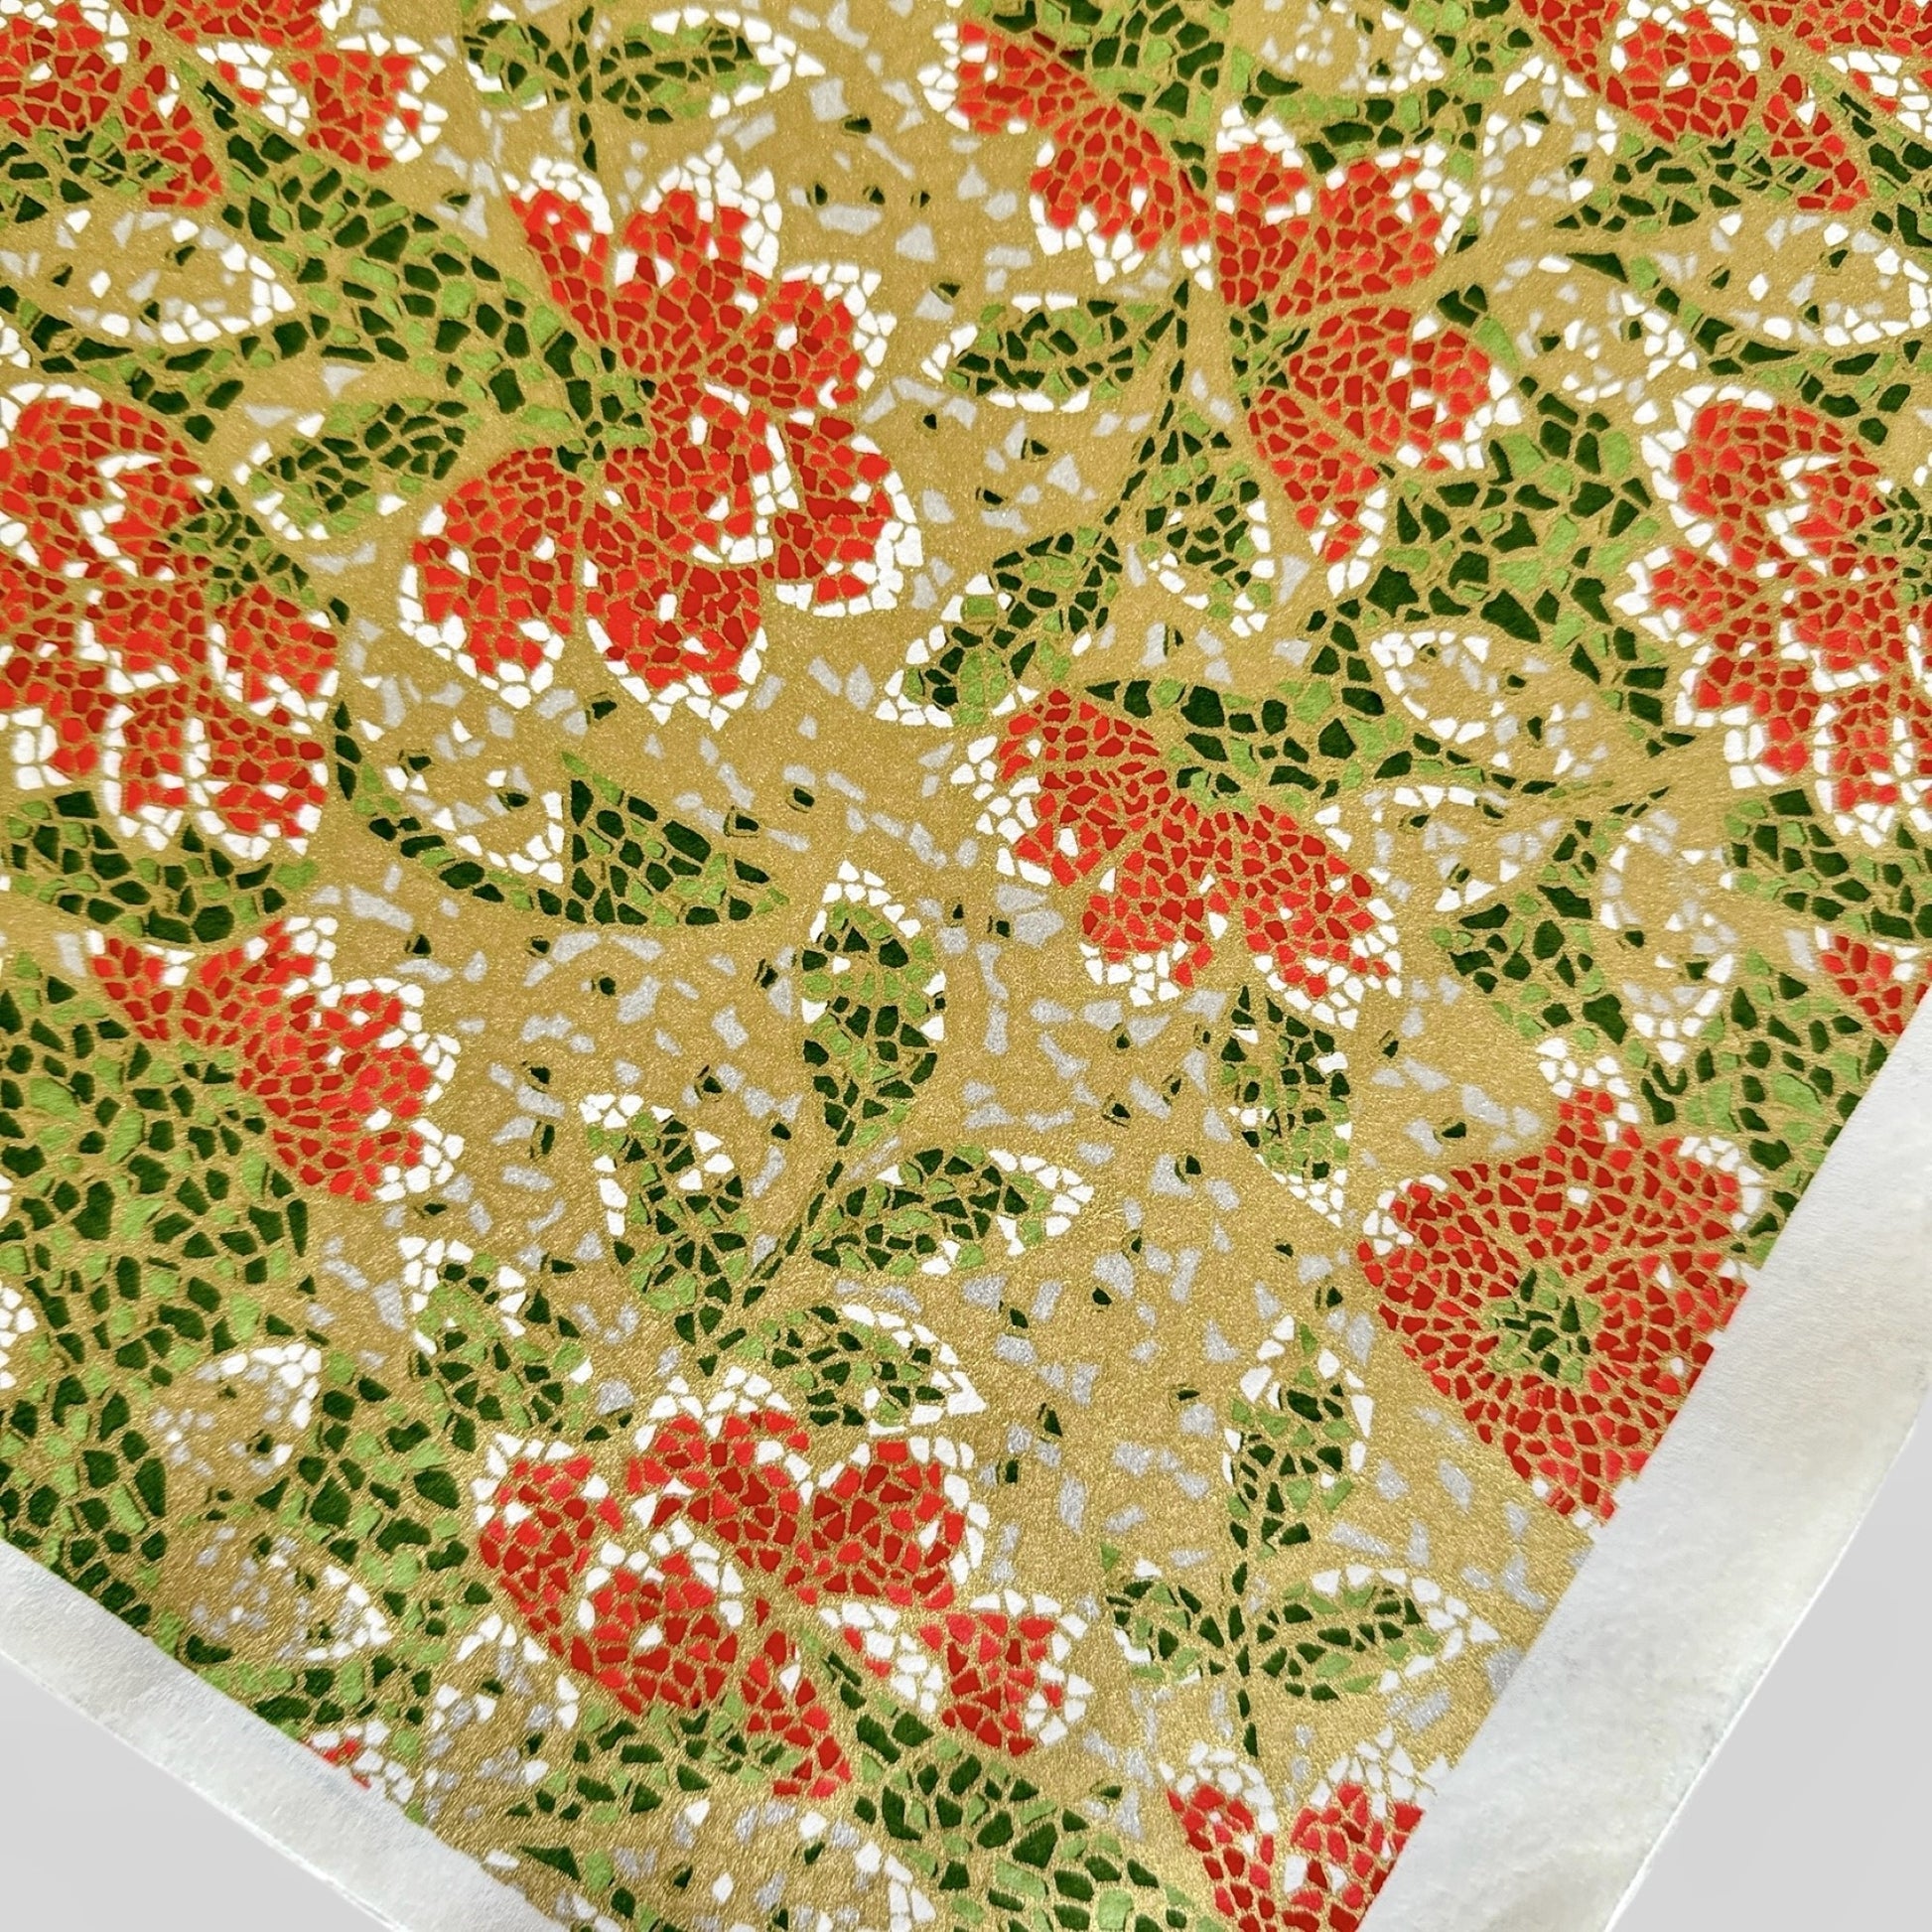 Japanese silkscreen chiyogami paper with a mosaic pattern of scarlet chrysanthemums on gold with green foliage.